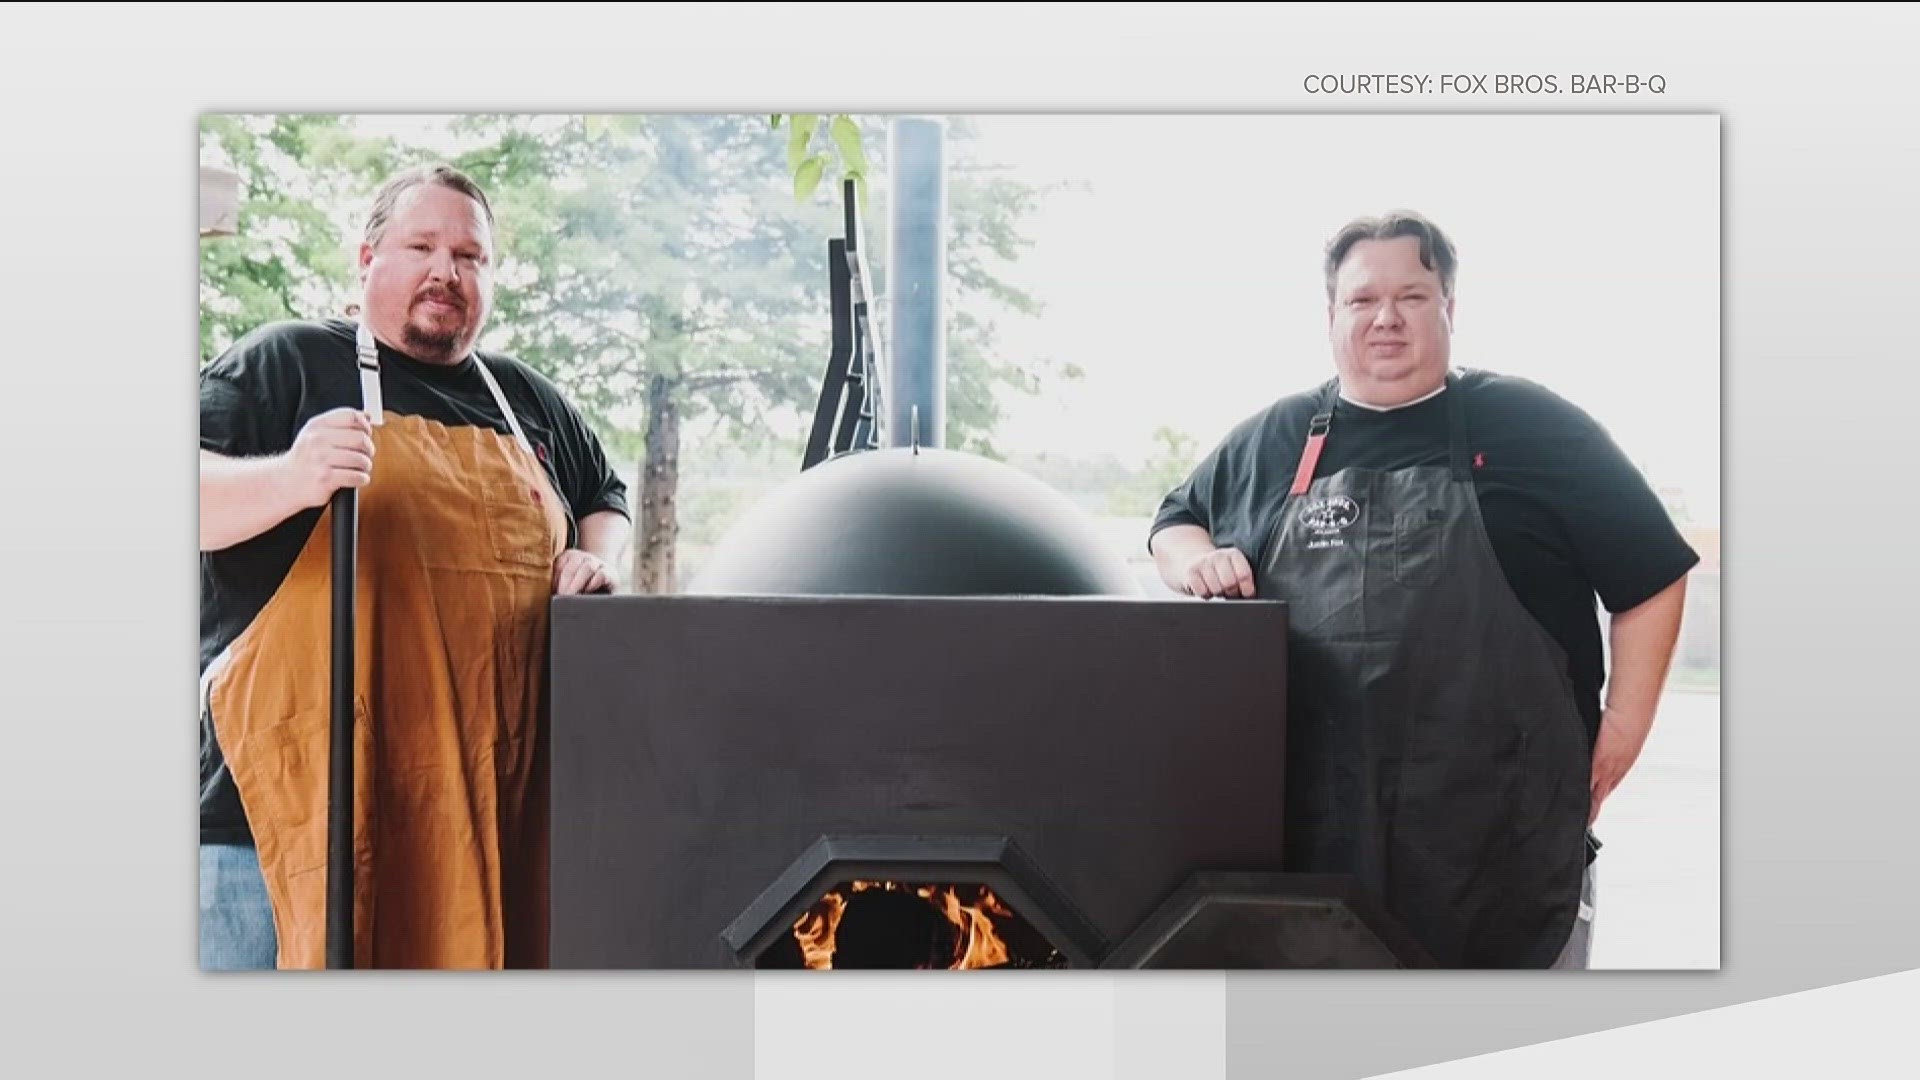 The two brothers, Jonathan and Justin Fox, combined the tradition of Texas with flavors of Georgia creating "Atlanta style" BBQ.